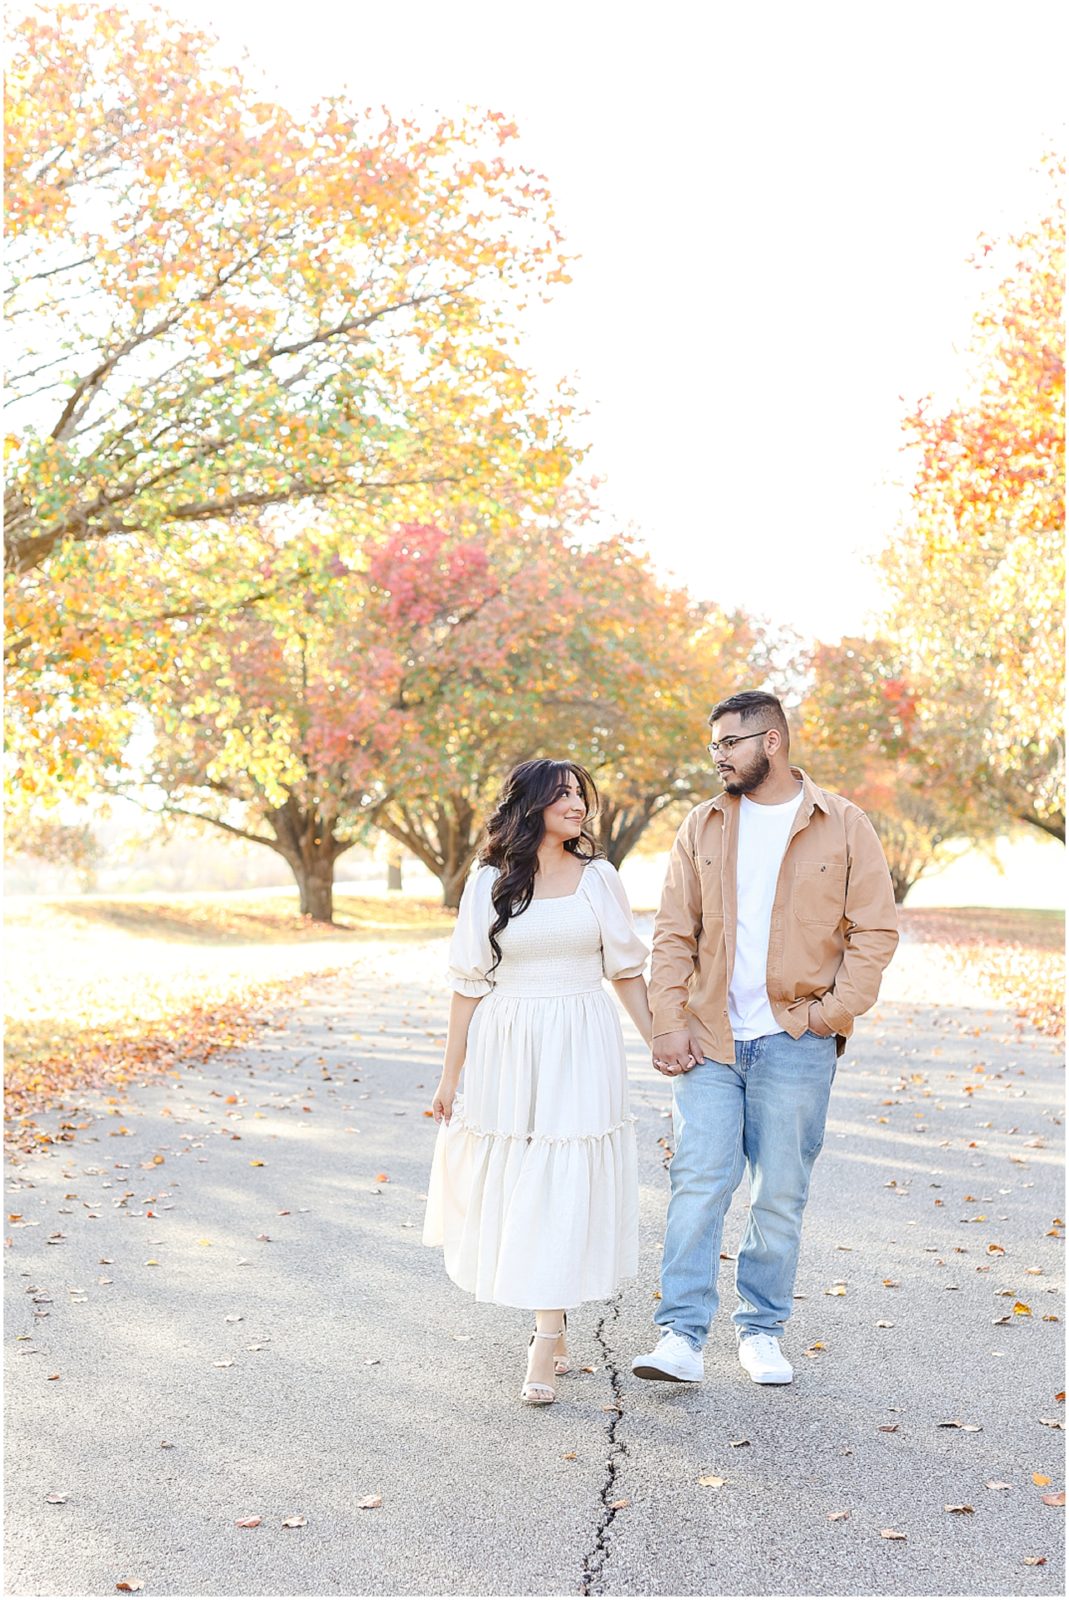 Family Photos | Family Photographer in Kansas | Family Photography Kansas City | Shawnee Mission Park | Where to take photos in the fall | What to wear for a fall engagement or family session | Kansas City Missouri Wedding & Portrait Photography